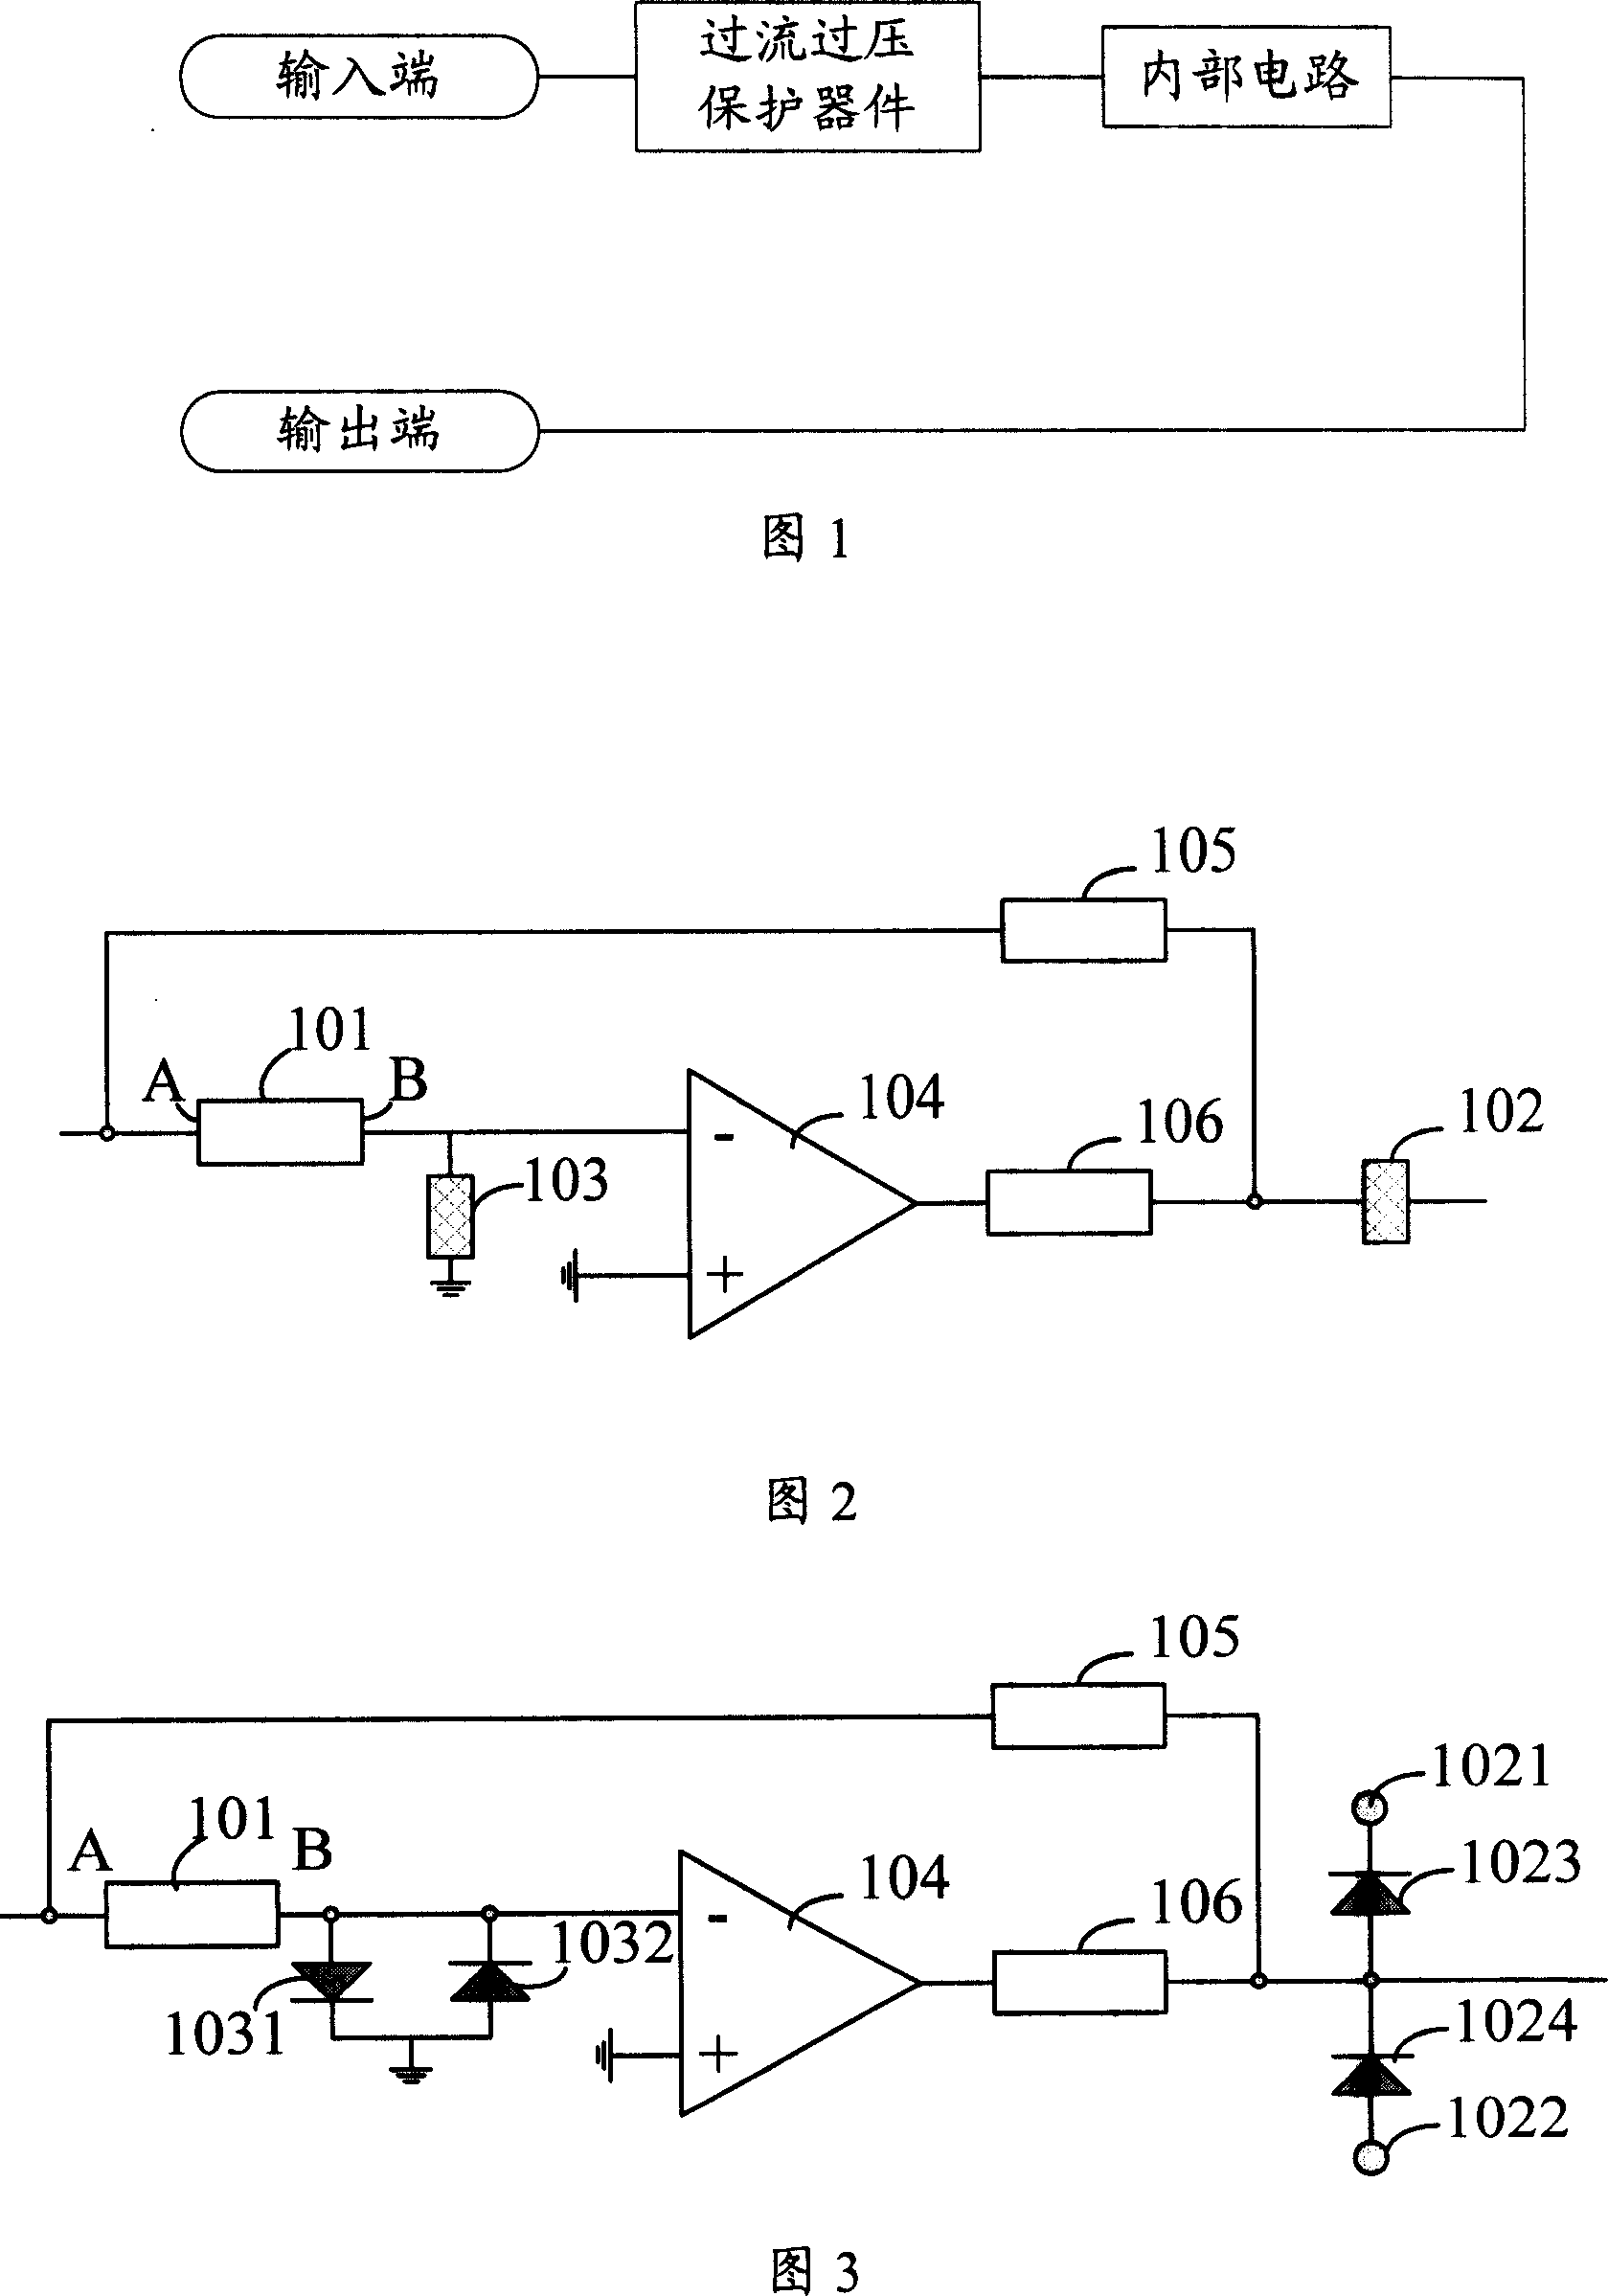 Over current and over voltage protection circuit and signal source circuit